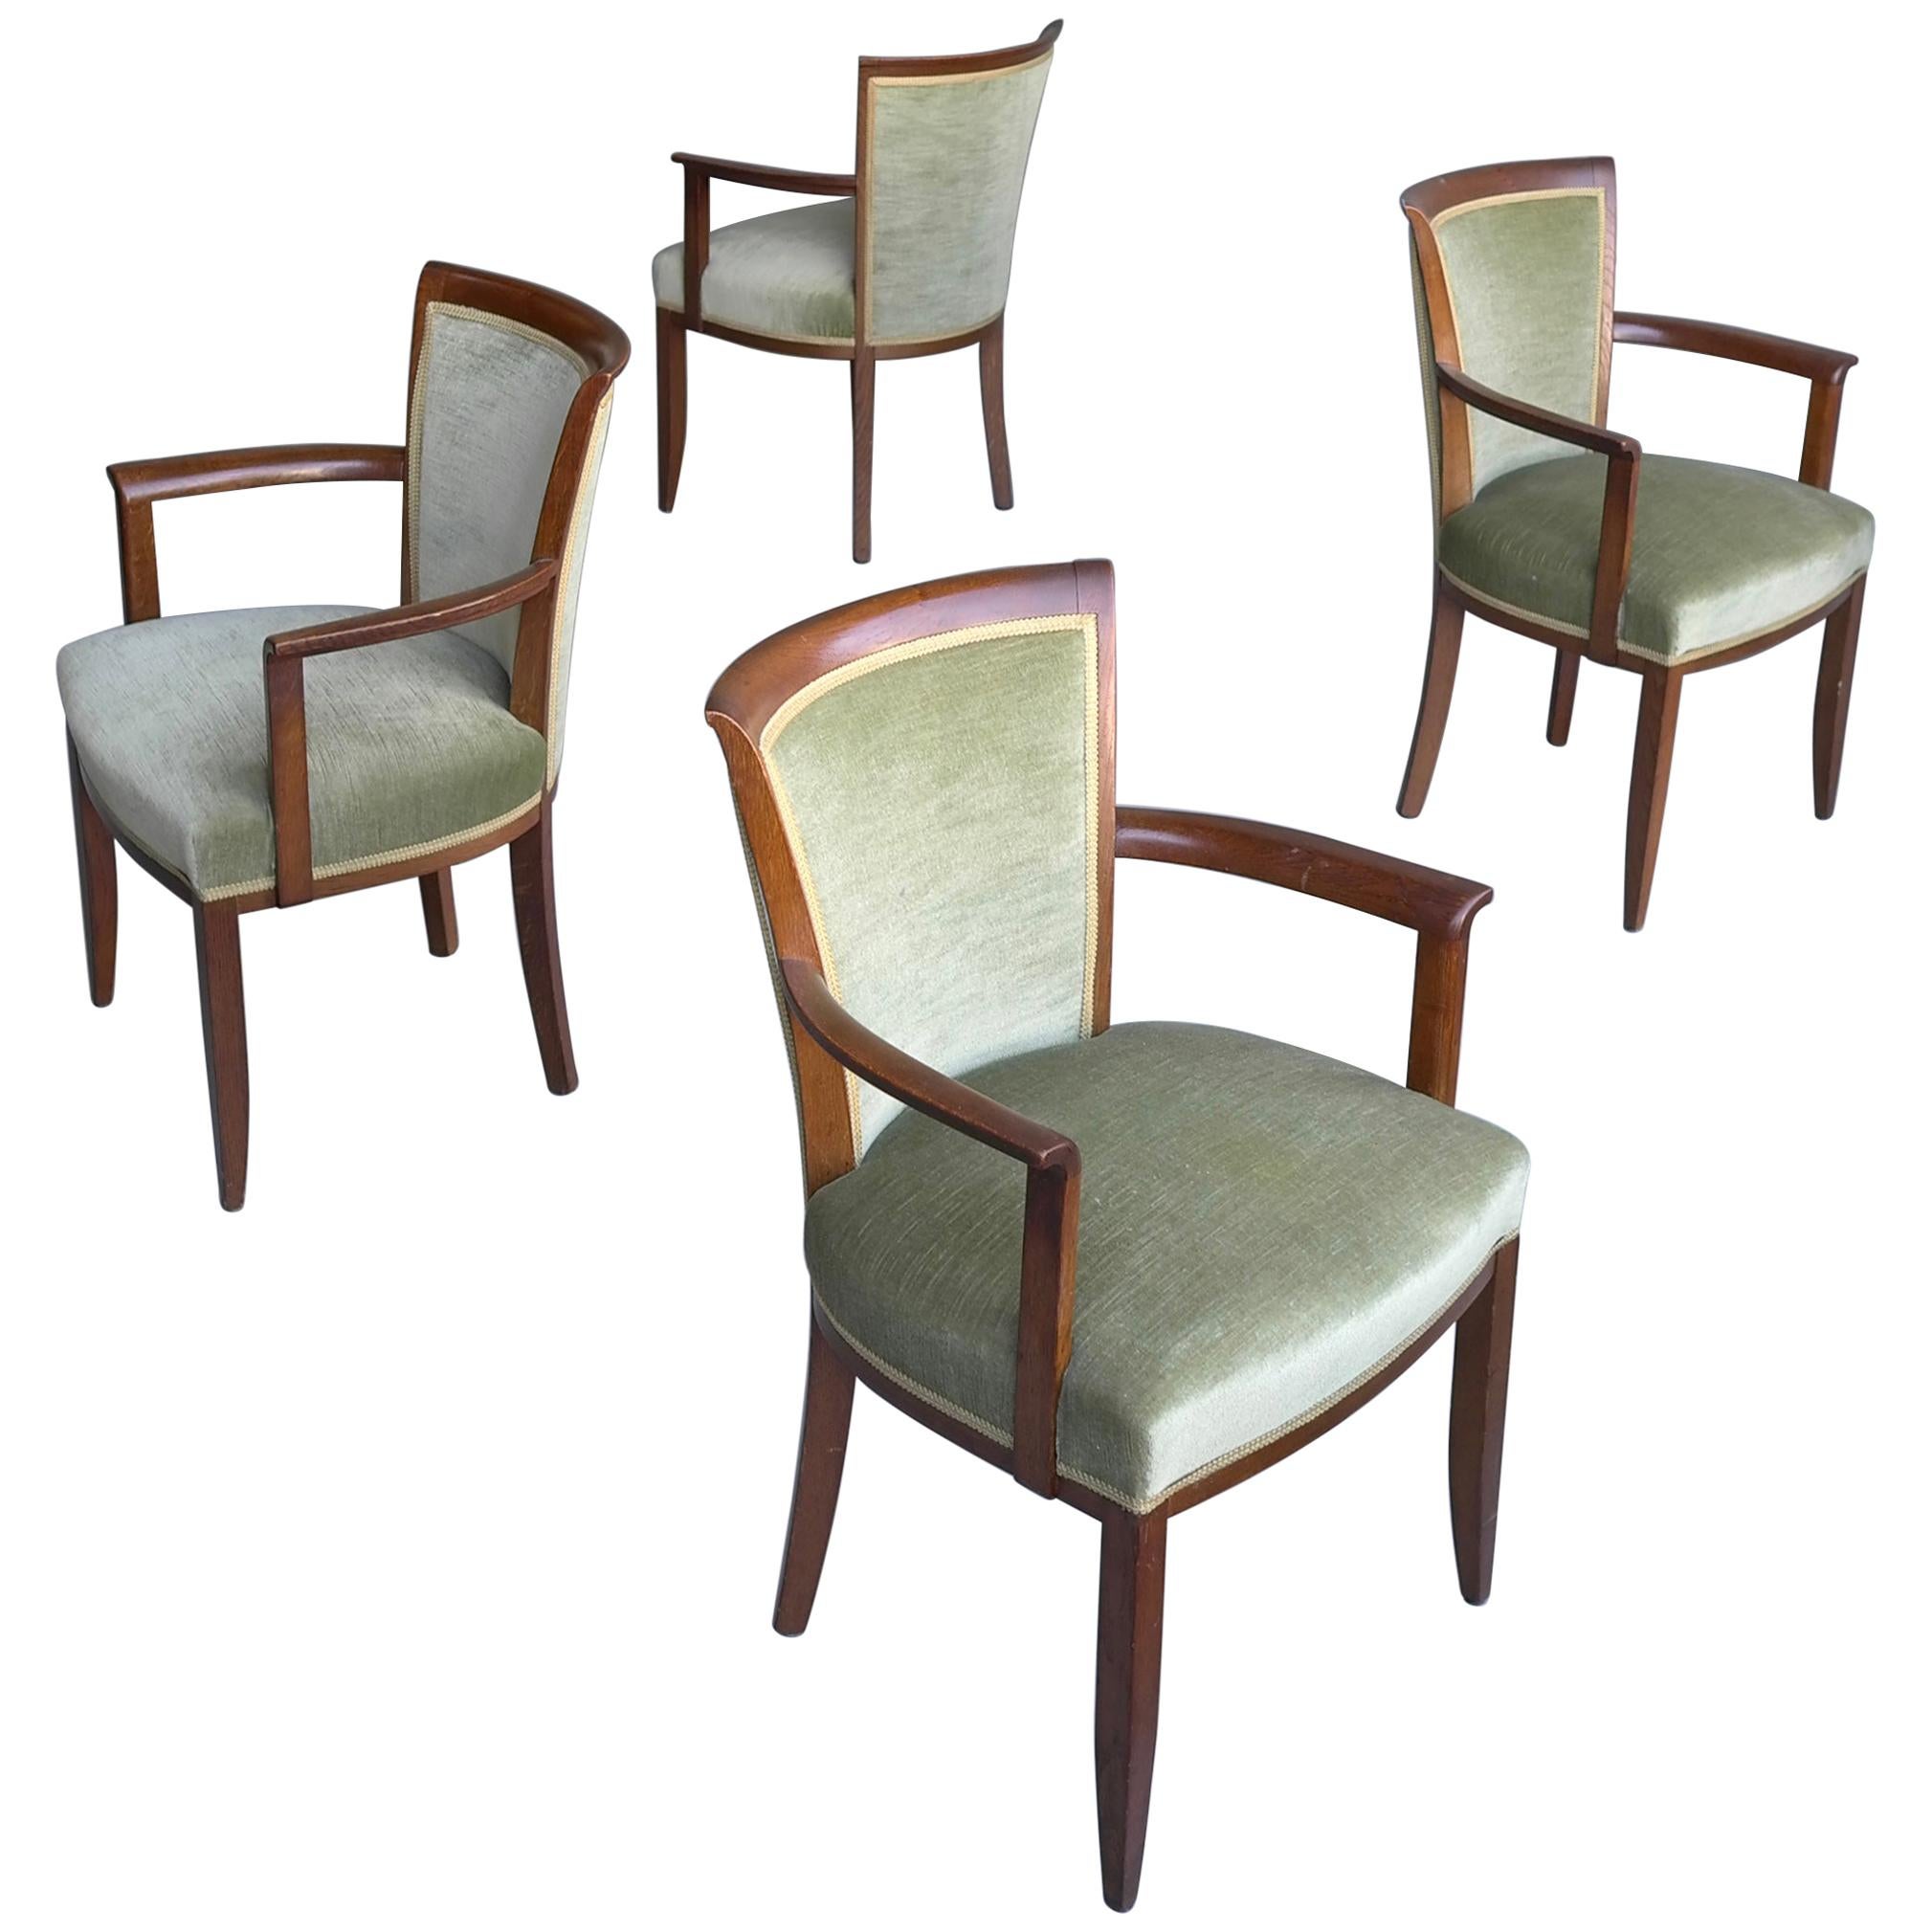 Art Deco Green Velvet Dining Room Chairs by H. Pander & Zonen Netherlands, 1930s For Sale